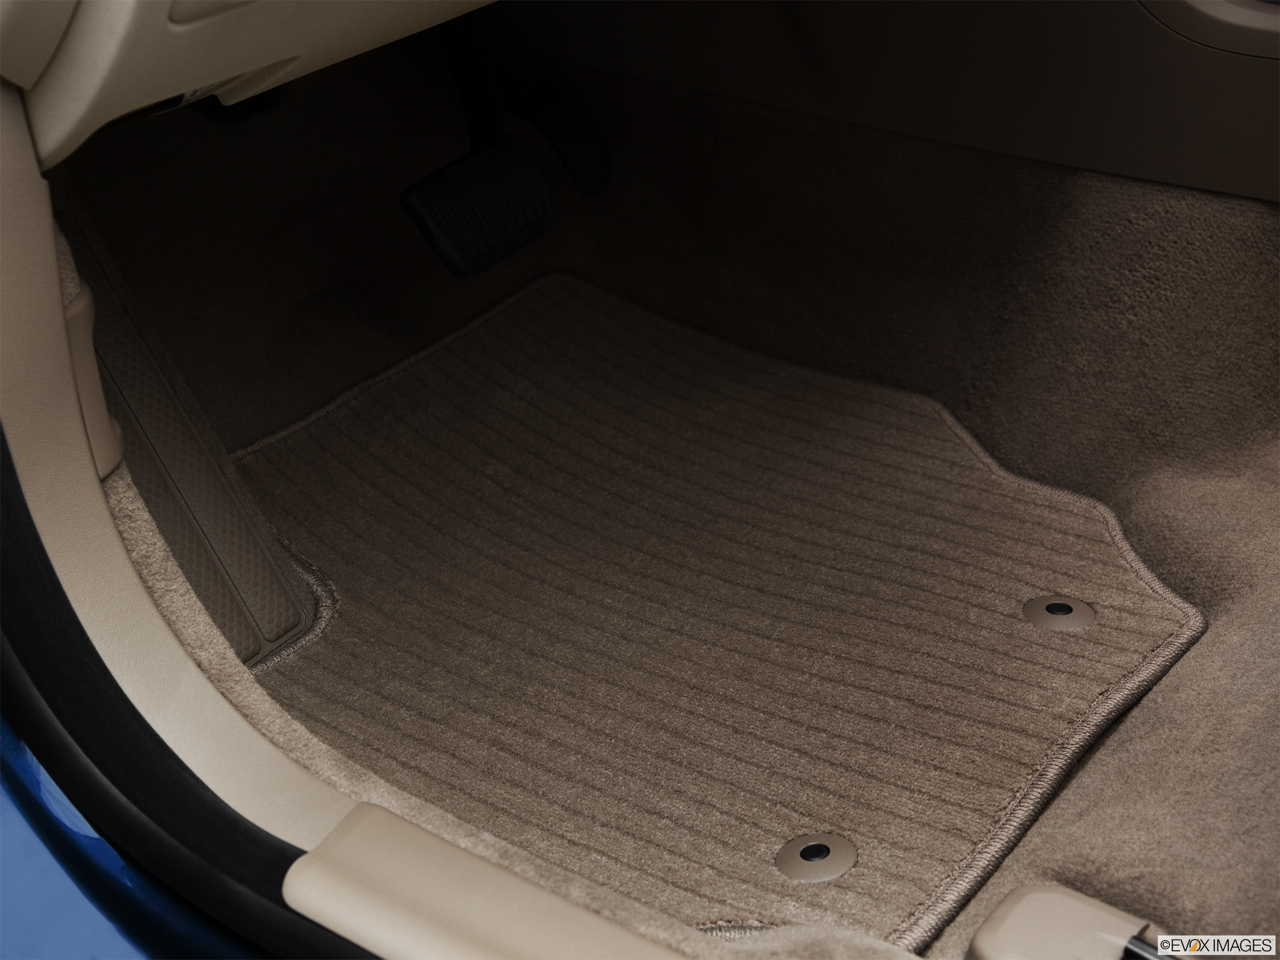 2011 Volvo S80 3.2 Driver's floor mat and pedals. Mid-seat level from outside looking in. 